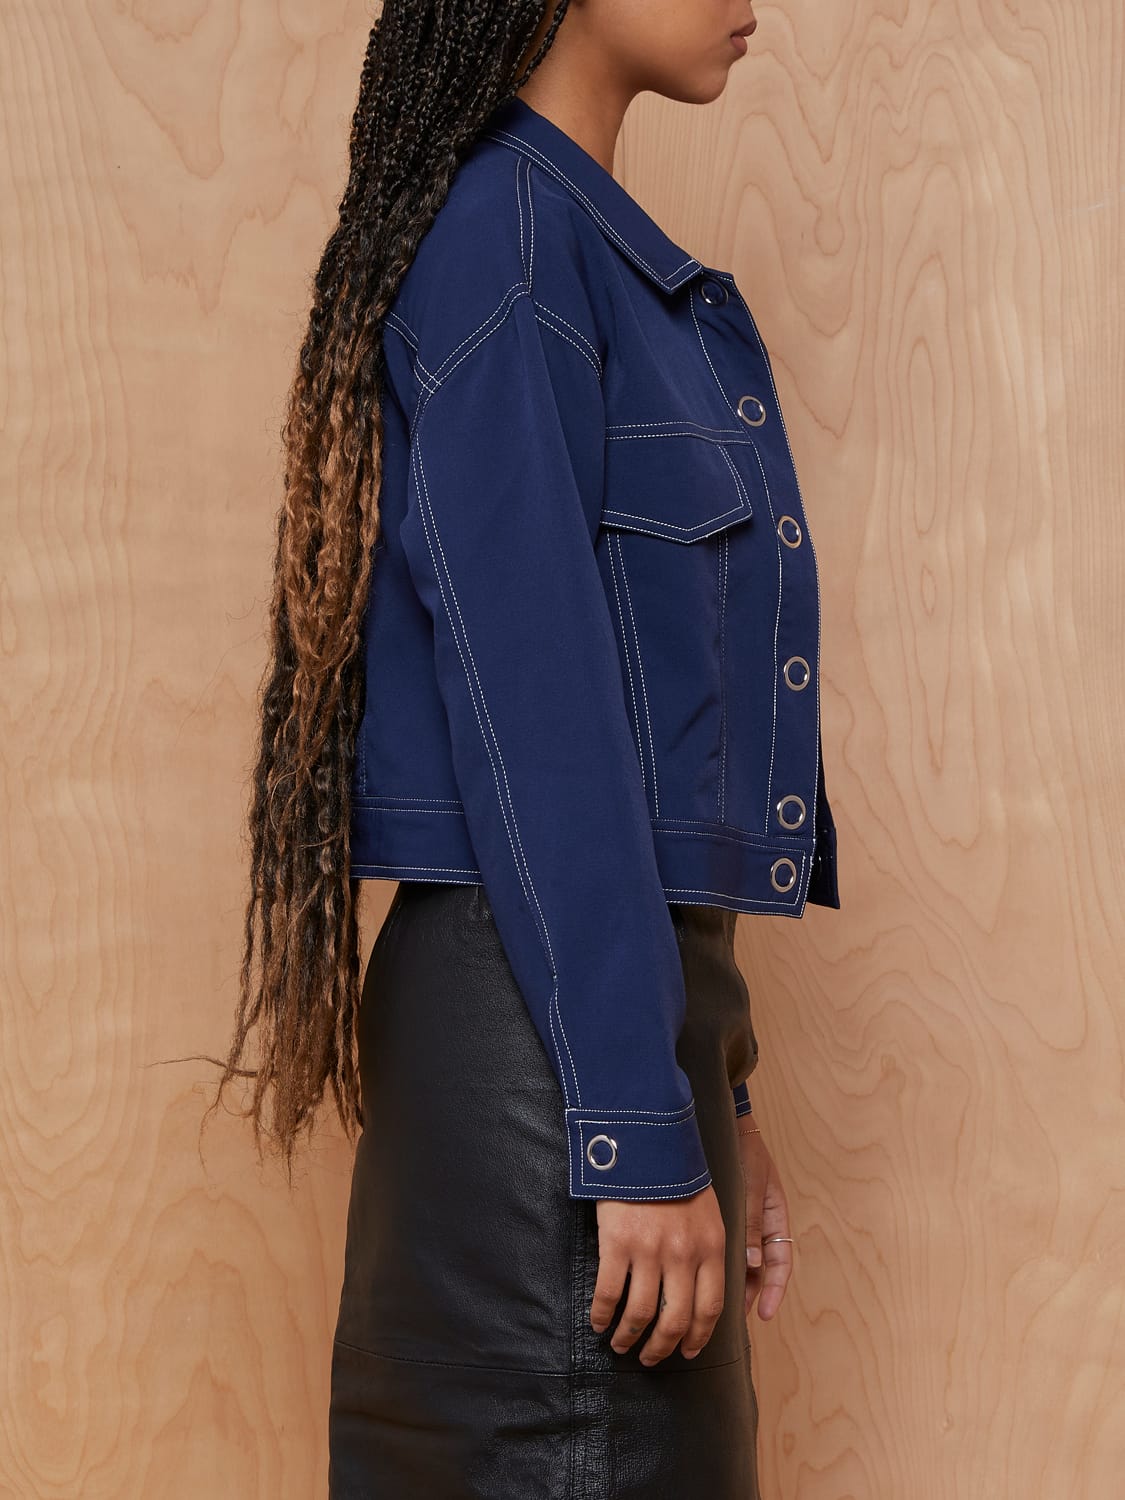 Pomelo Navy Contrast Stitching Cropped Jacket